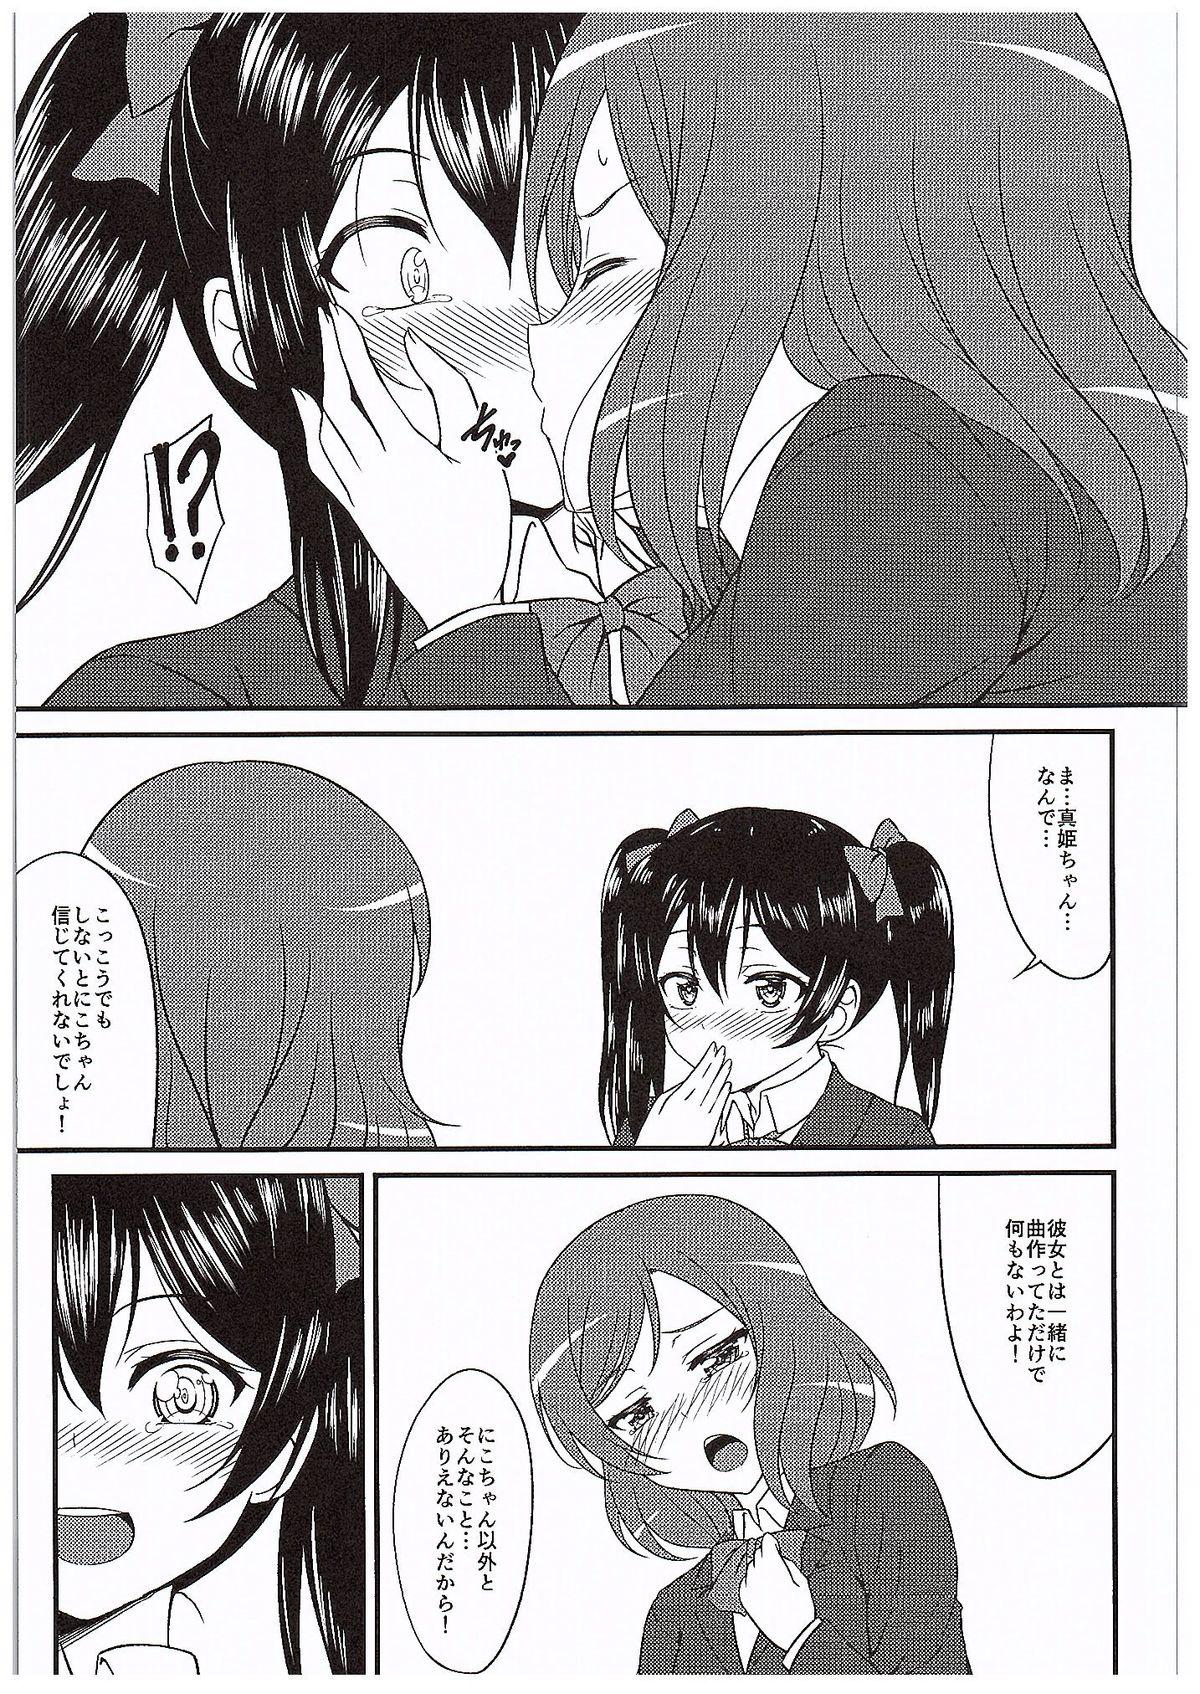 Sexteen Magnetic Love - Love live Masturbating - Page 6